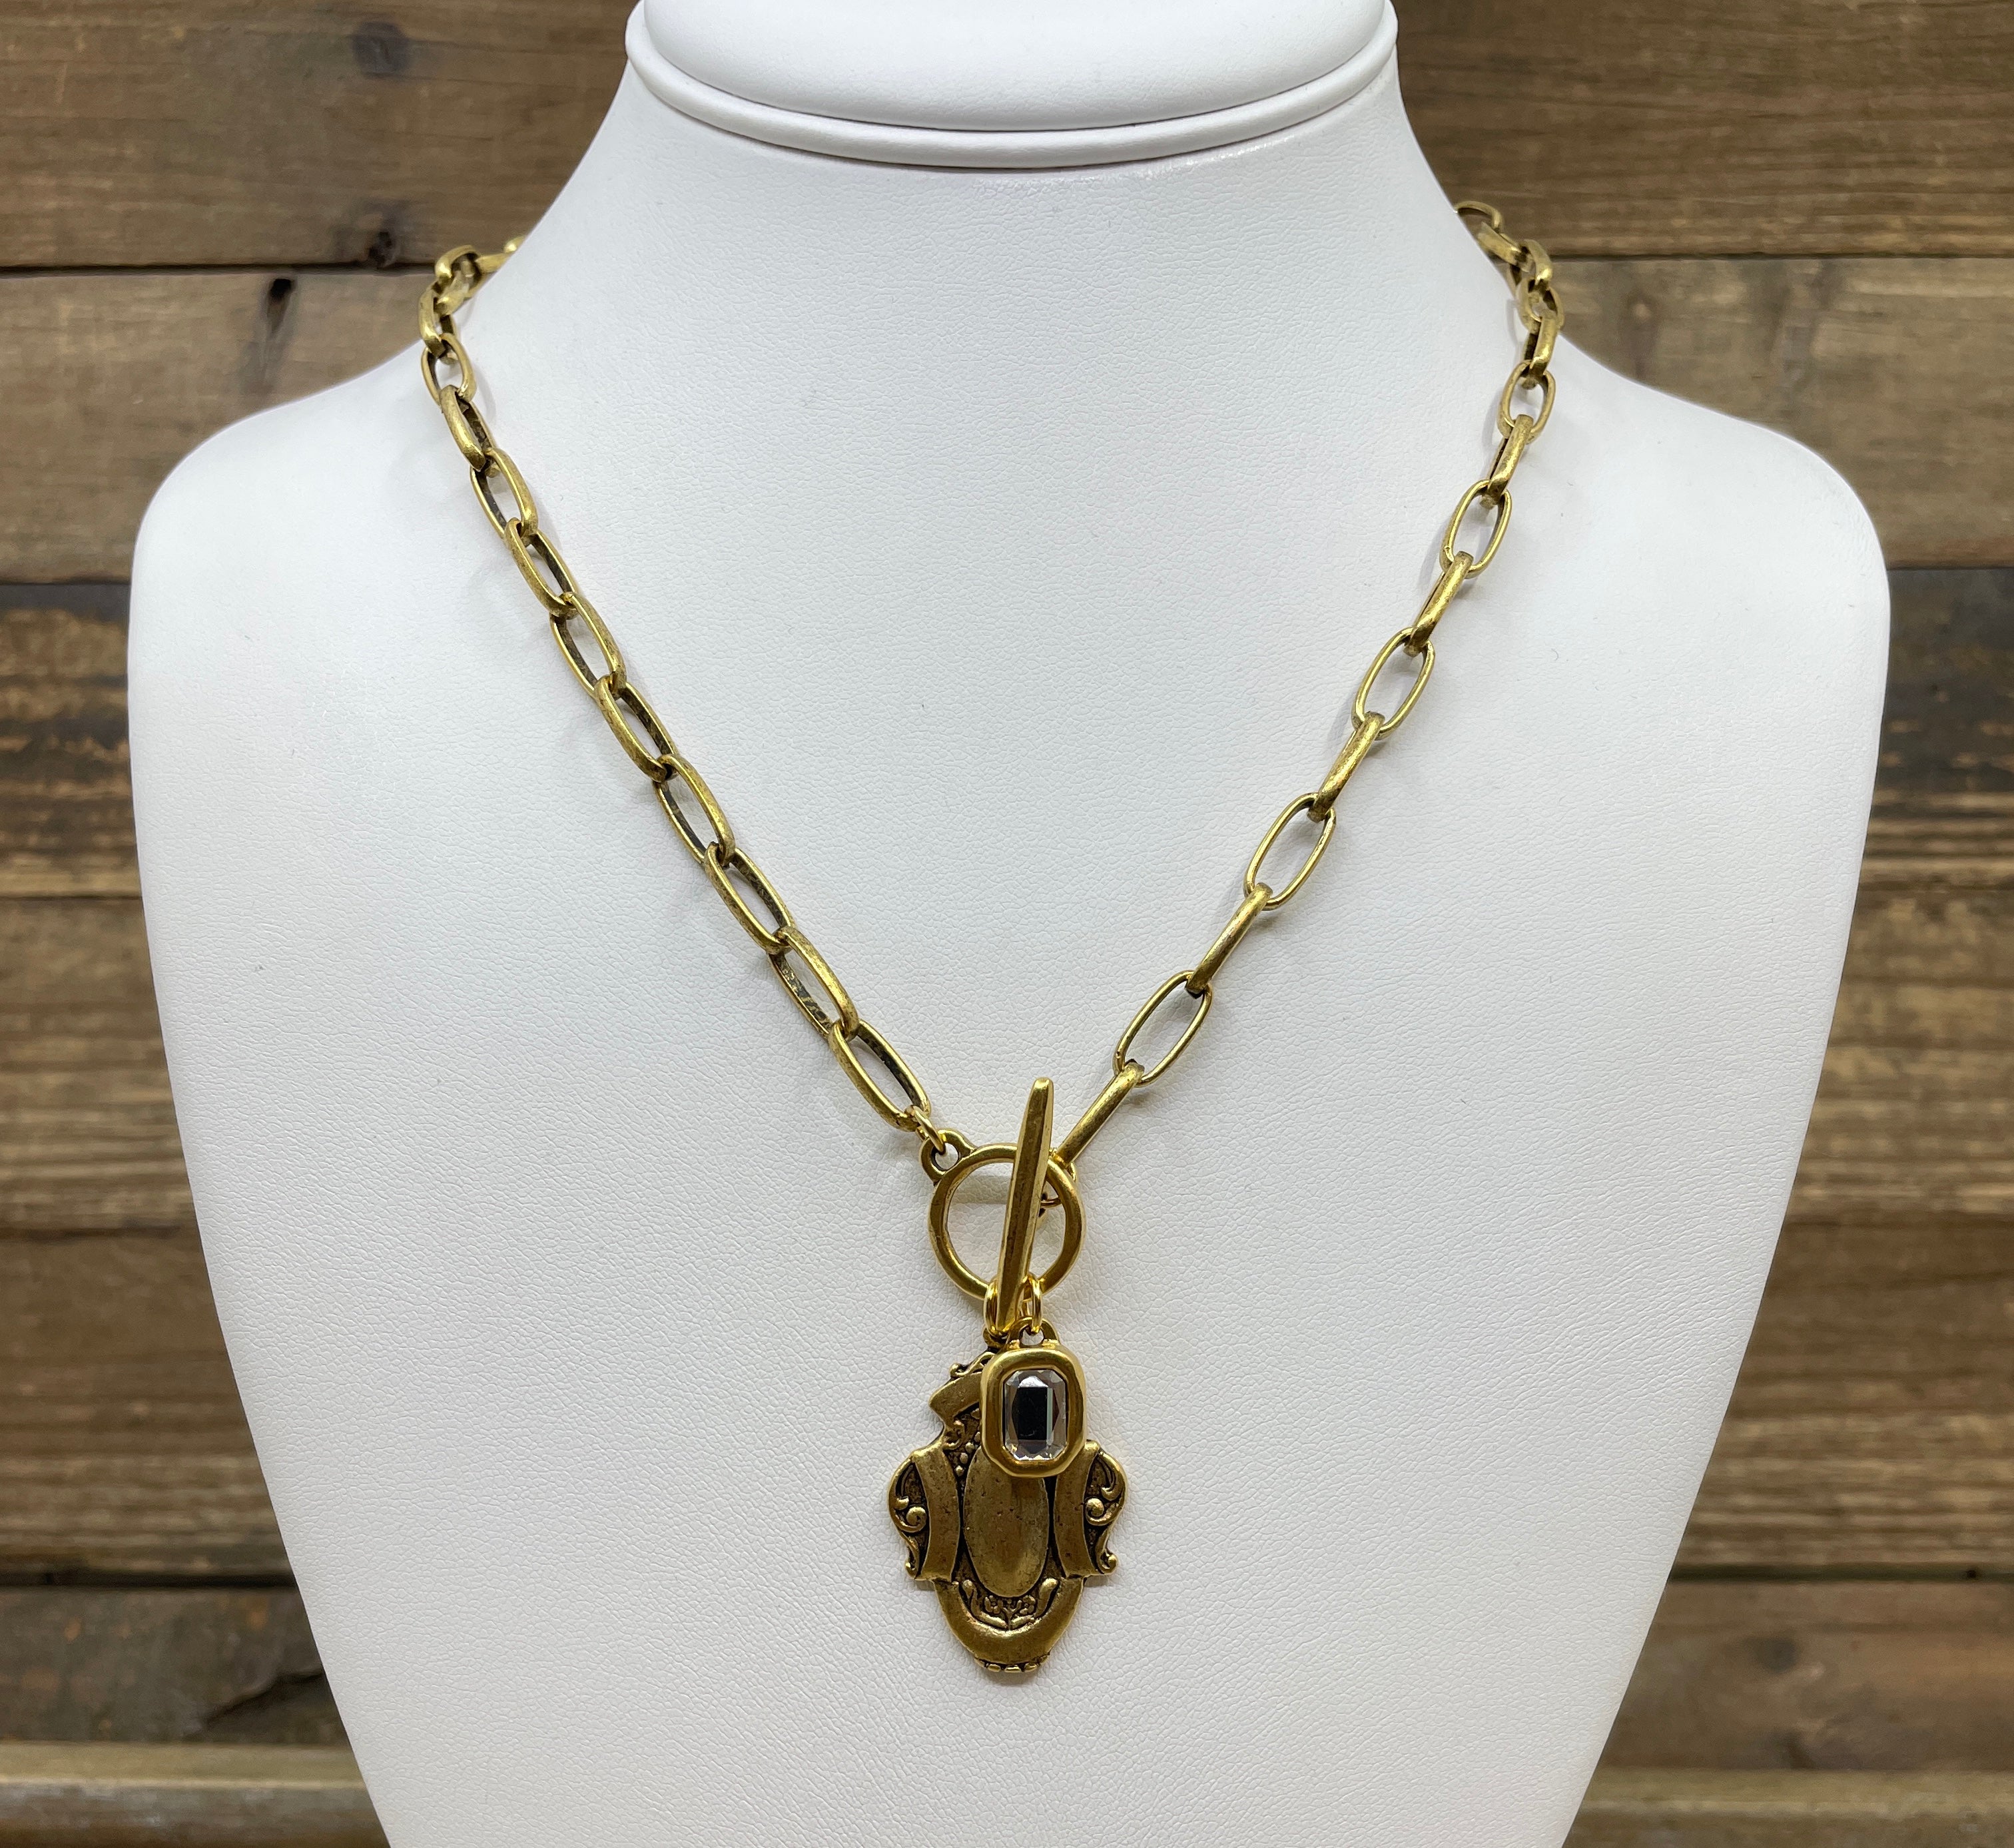 Gold Plated 18" Chain with Reproduction Watch Fob Pendant and Swarovski Crystal